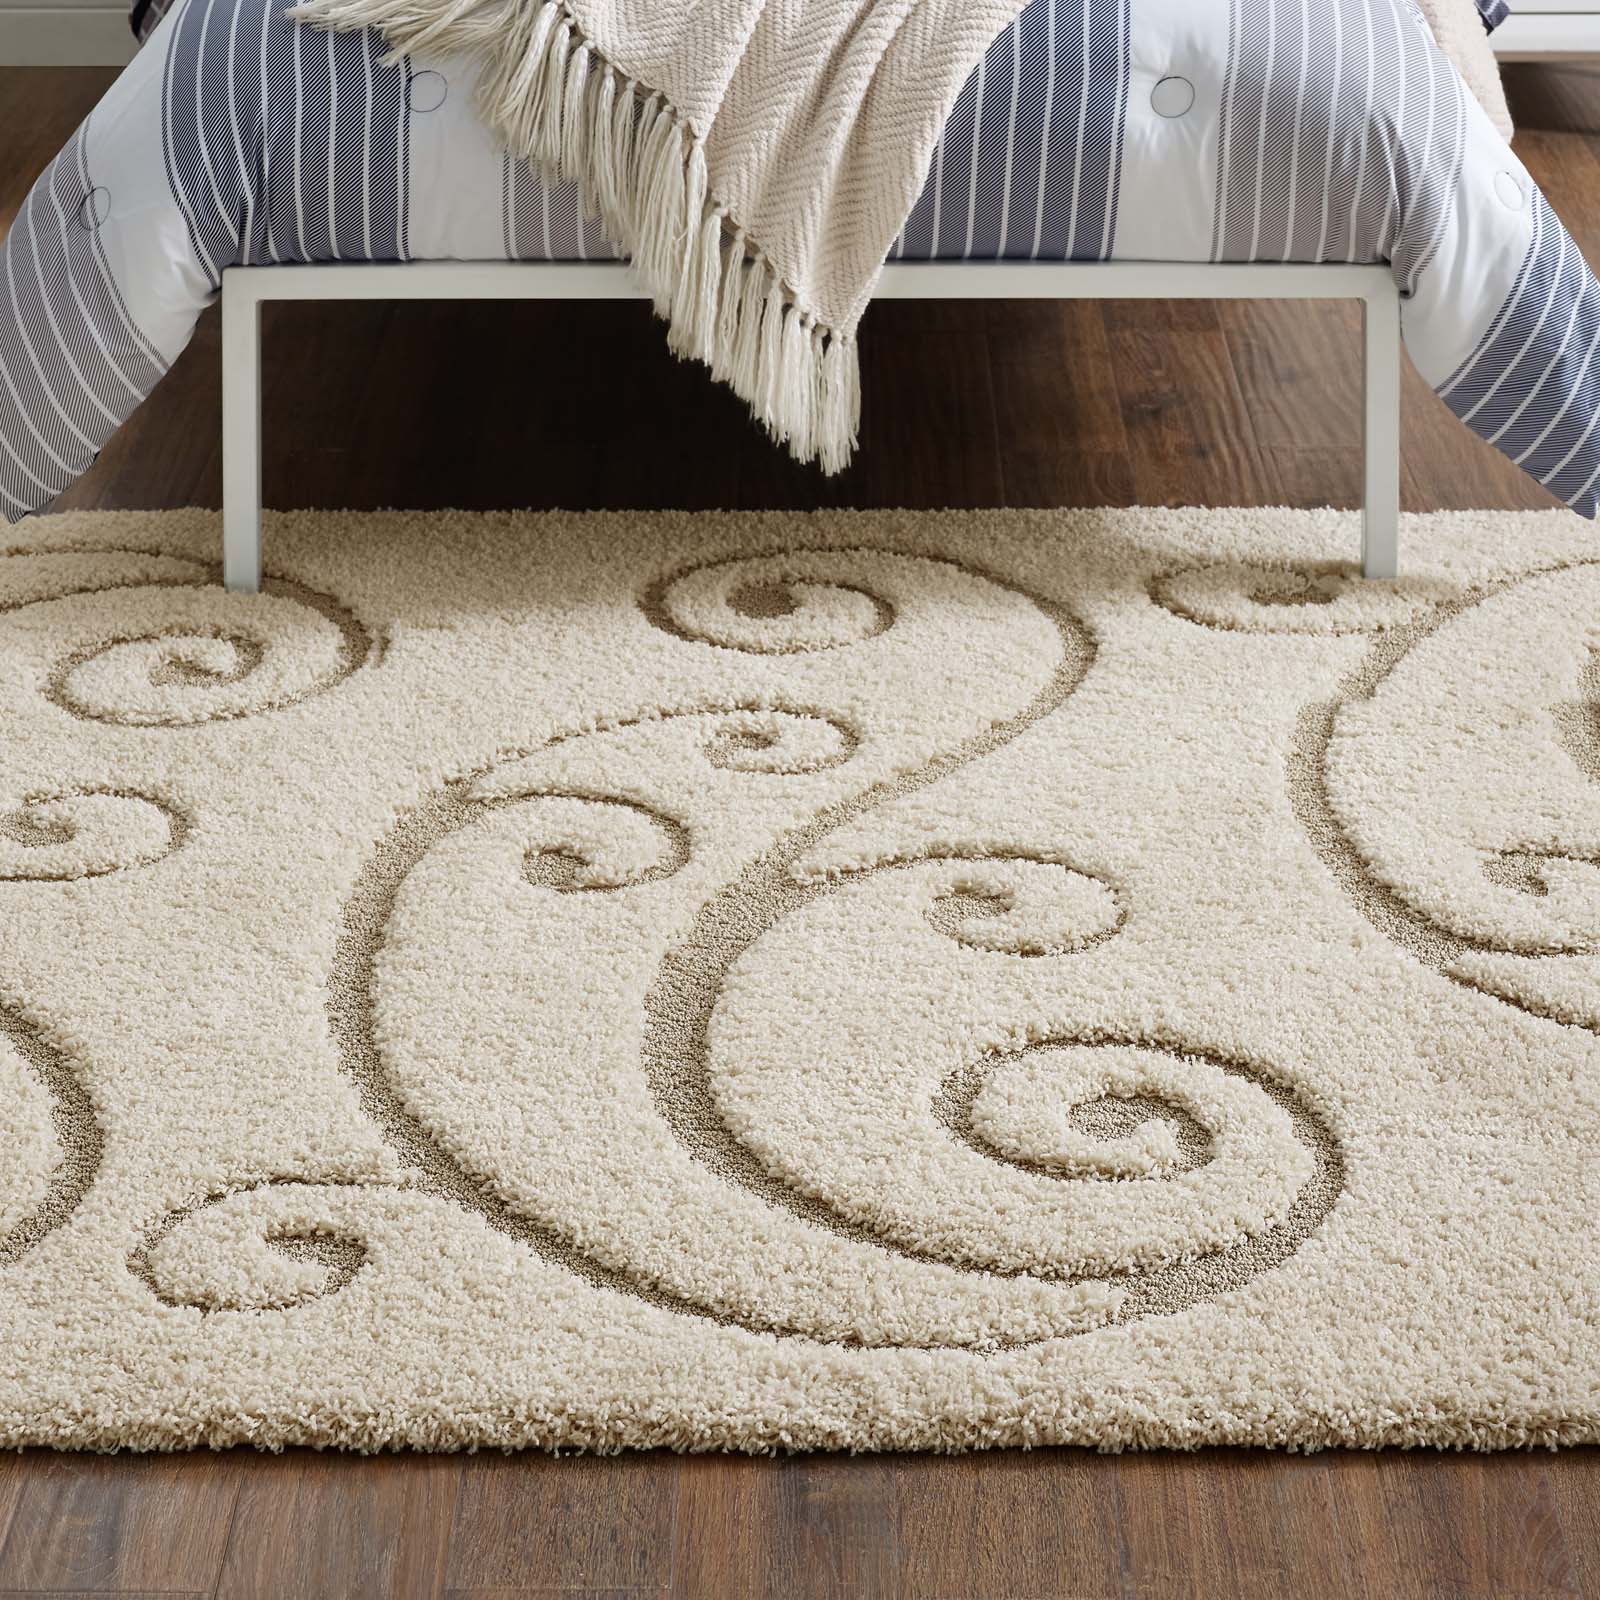 Jubilant Sprout Scrolling Vine 5x8 Shag Area Rug